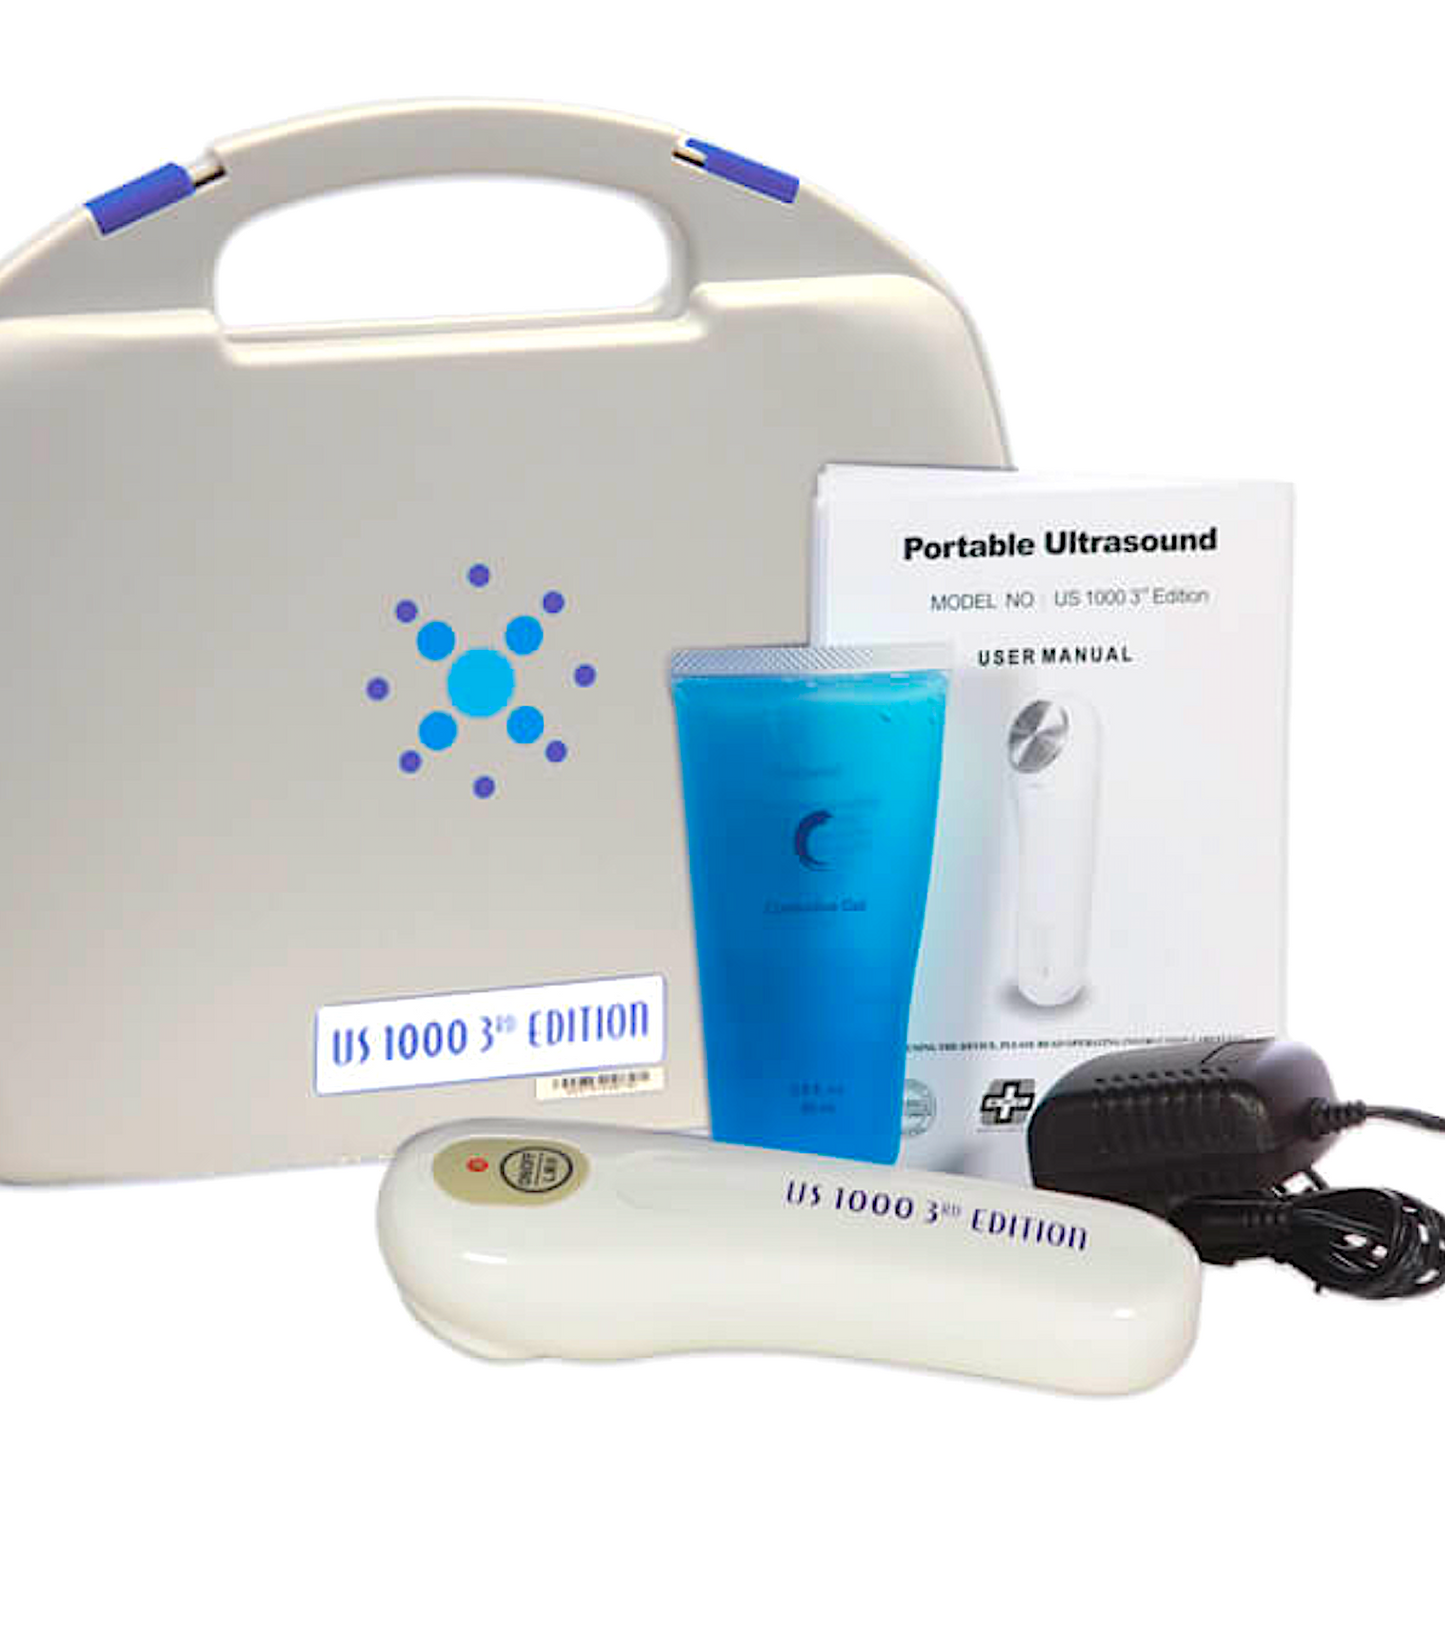 ROSCOE MEDICAL US-1000: therapeutic ultrasound unit